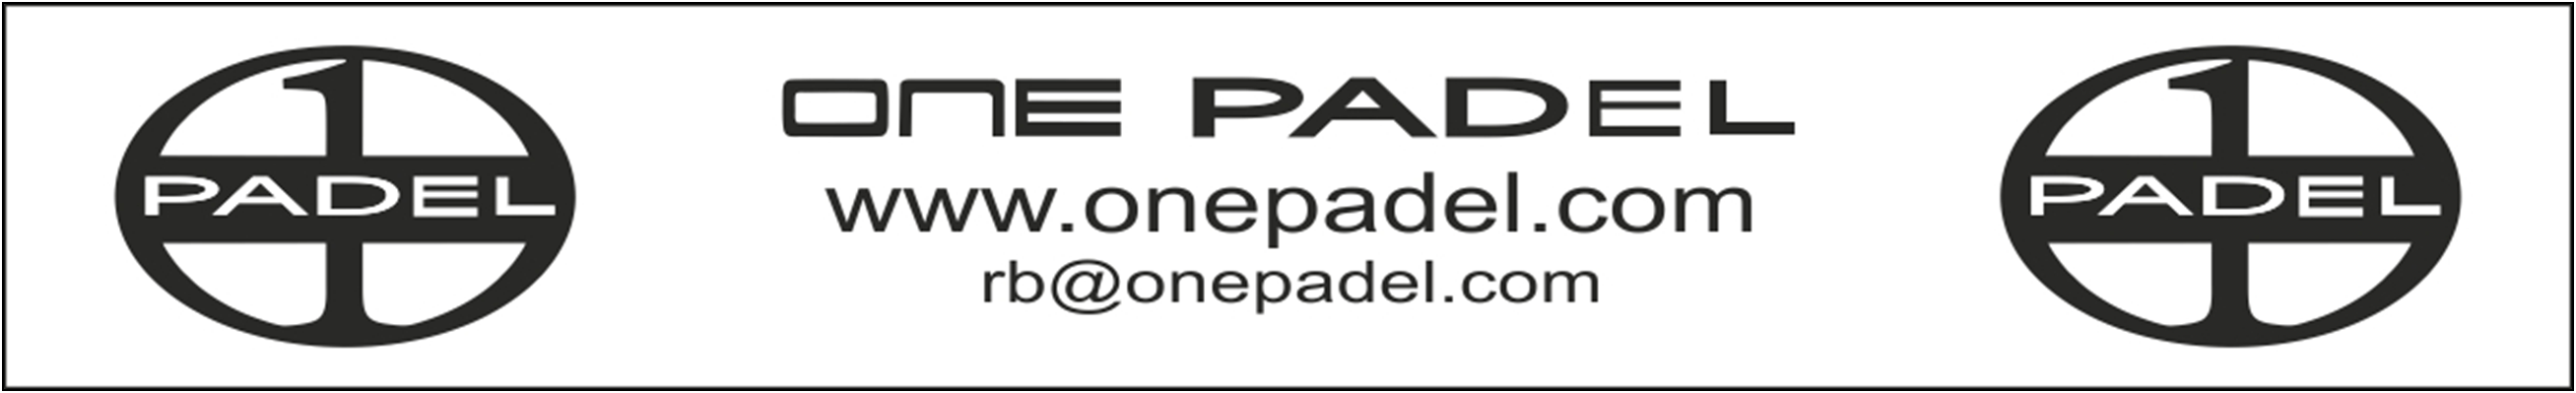 one padel contact